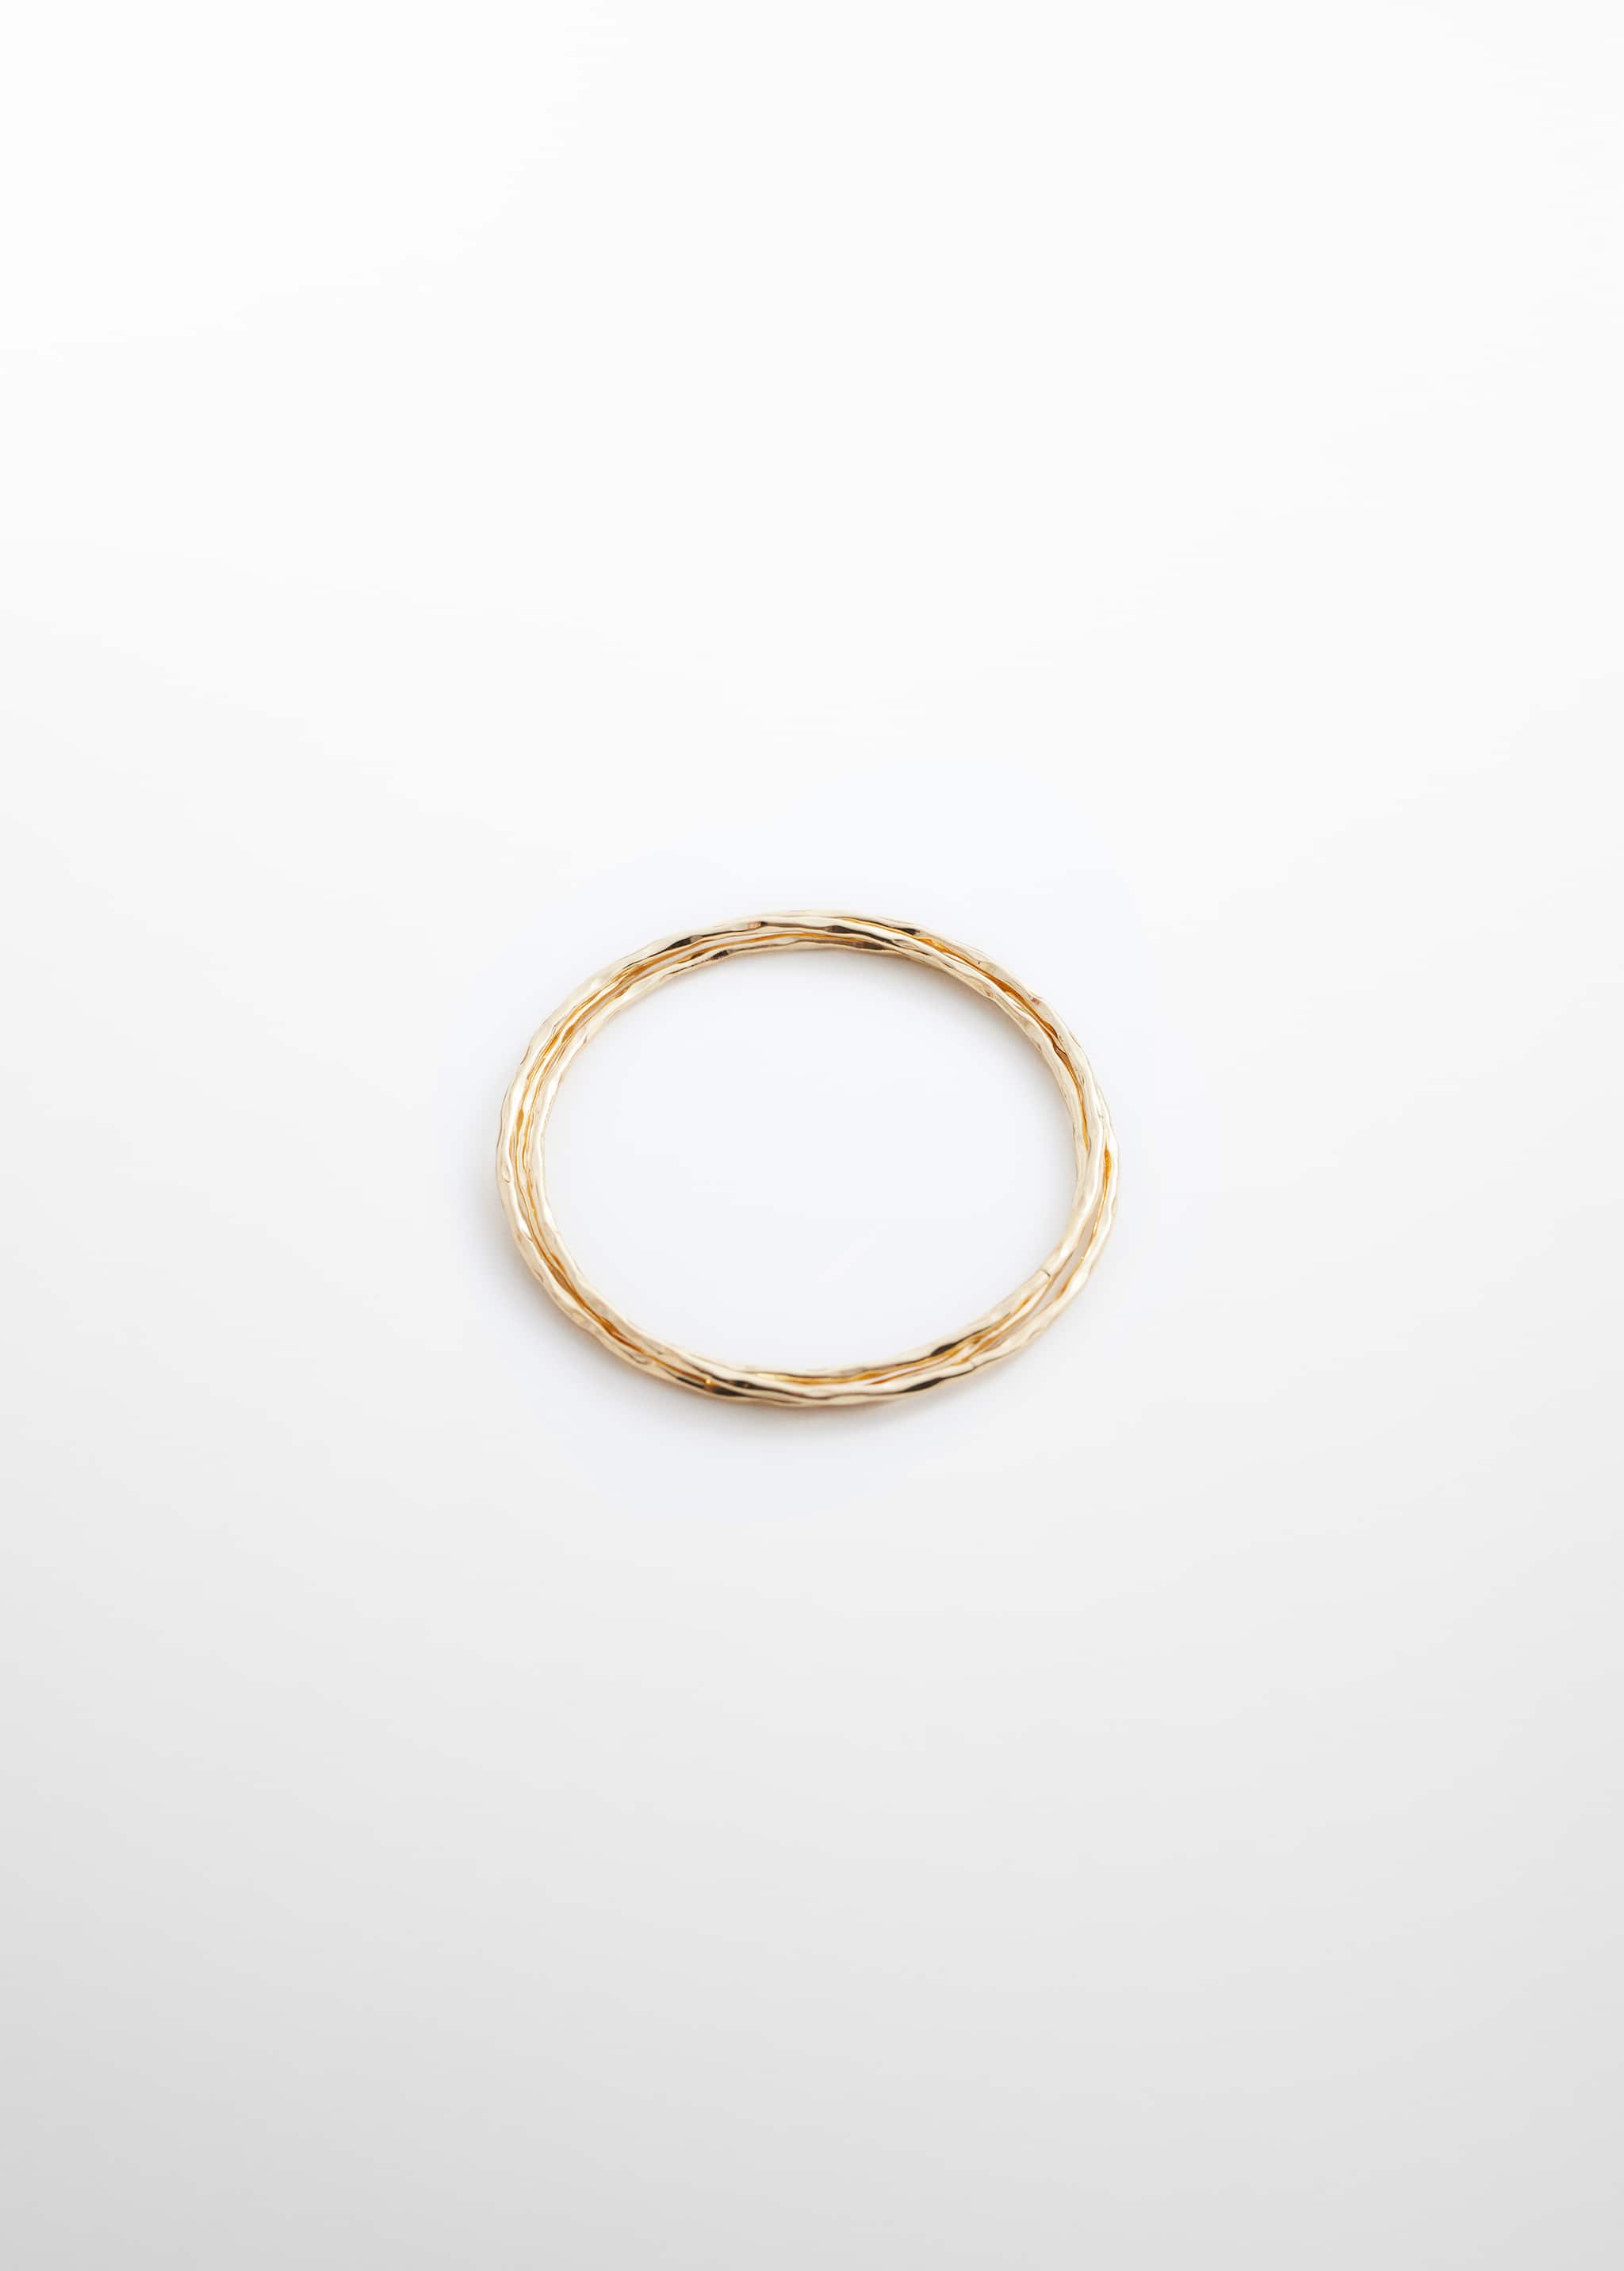 Combined hoop bracelets - Article without model